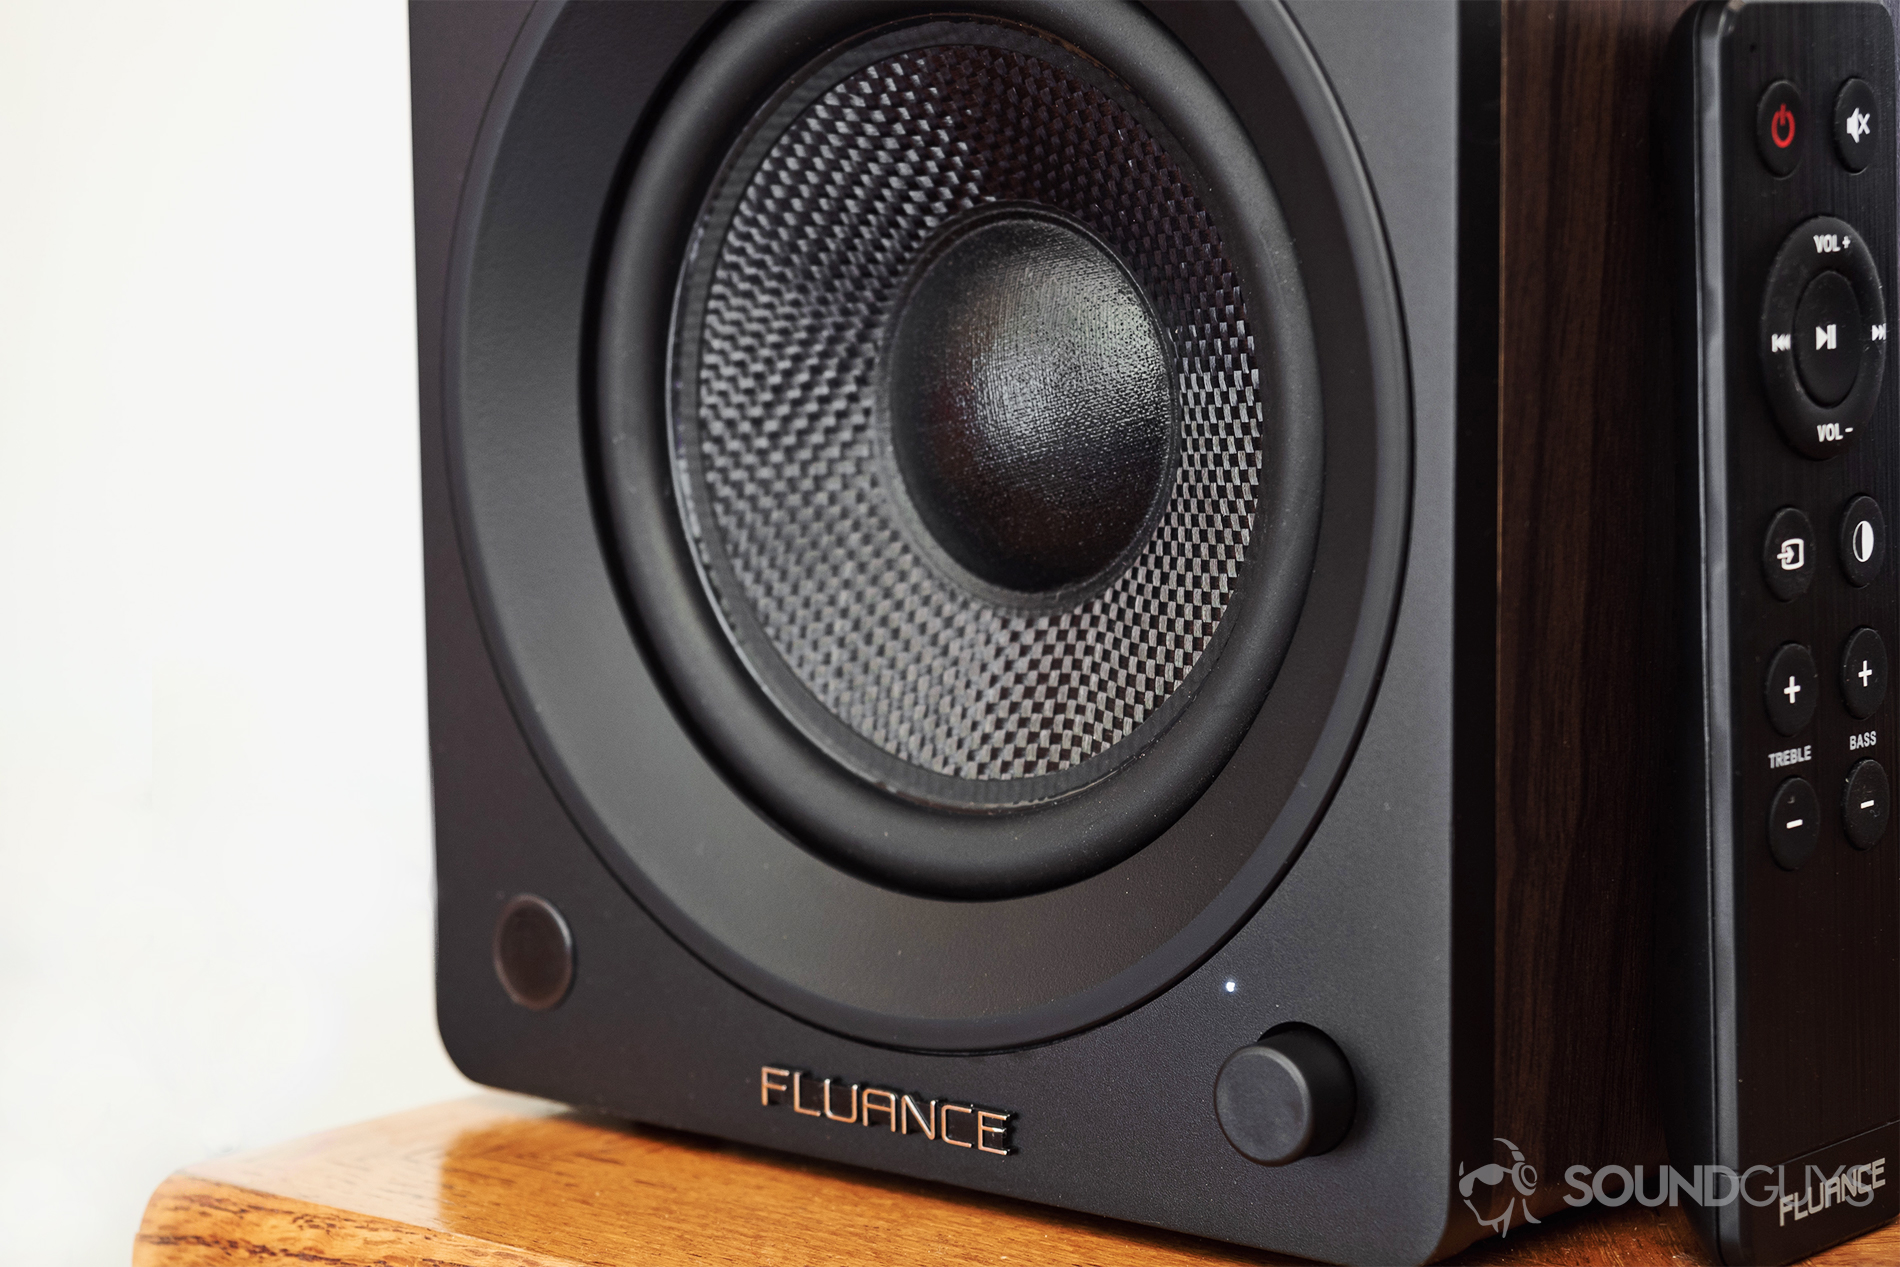 Fluance Ai40 review: An image of the bottom half of the active speaker, which houses the IR receiver, LED indicator, and volume knob.